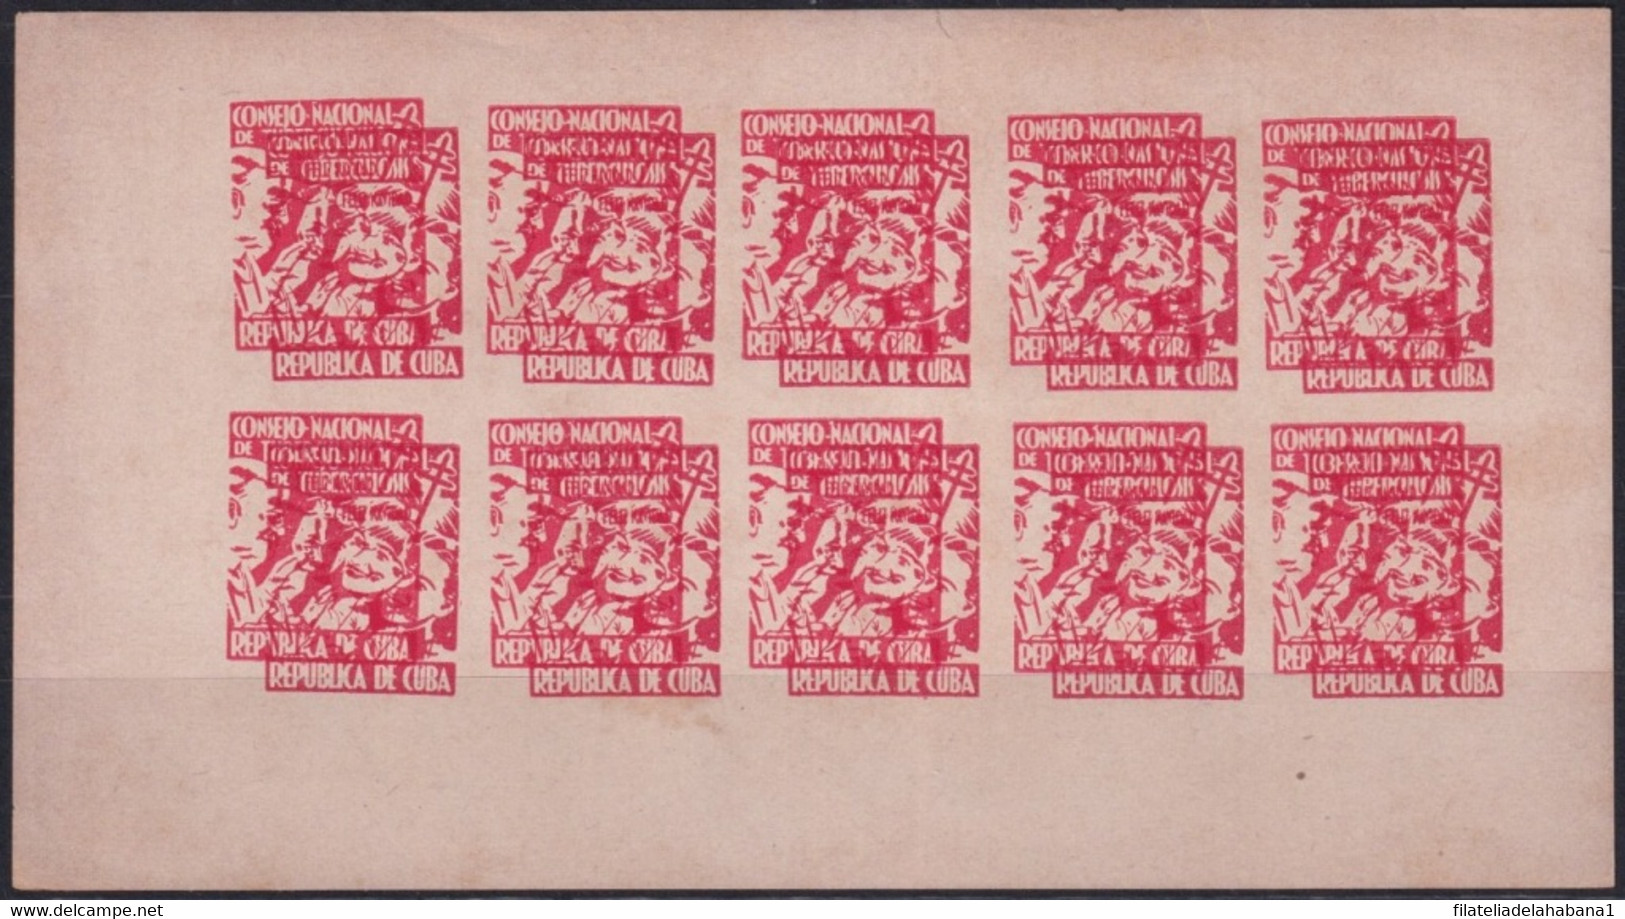 VI-528 CUBA CINDERELLA MEDICINE 1954 1c RED DOUBLE ENGRAVING ERROR WHITE PAPER TUBERCULOSIS IMPERFORATED SHEET. - Franking Labels